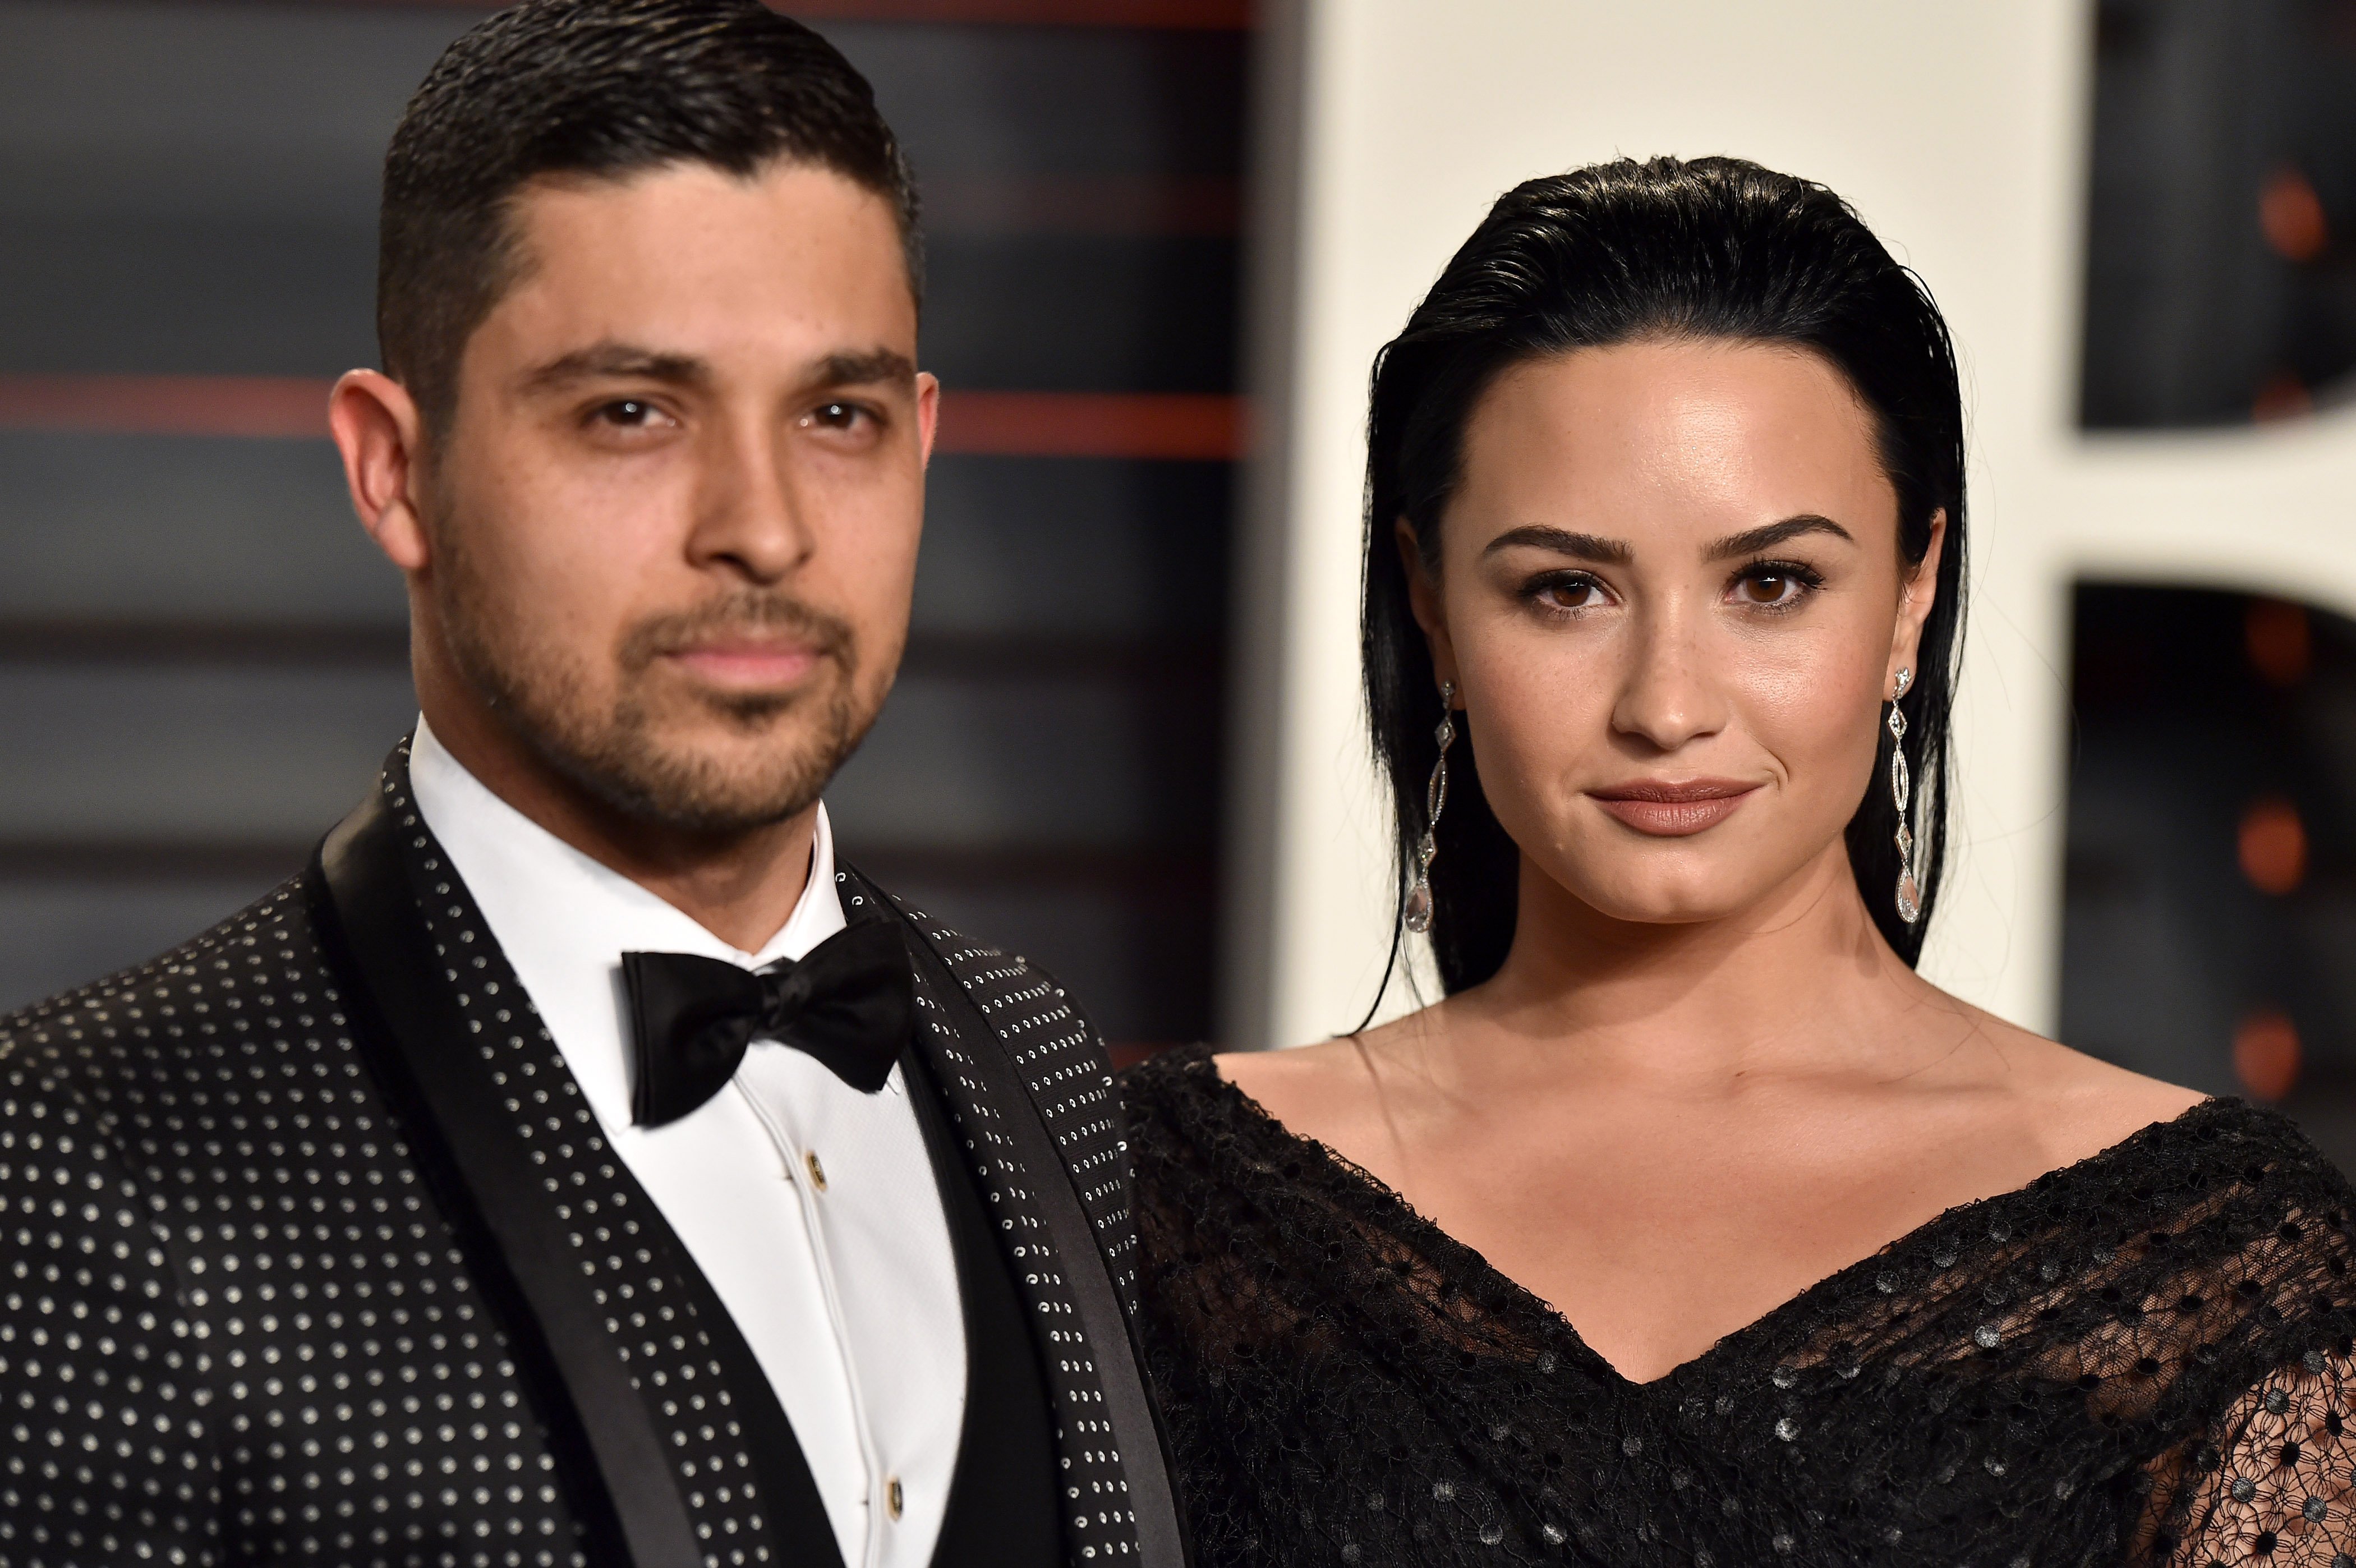 Wilmer Valderrama and Demi Lovato at the 2016 Vanity Fair Oscar Party on February 28, 2016 in Beverly Hills, California.